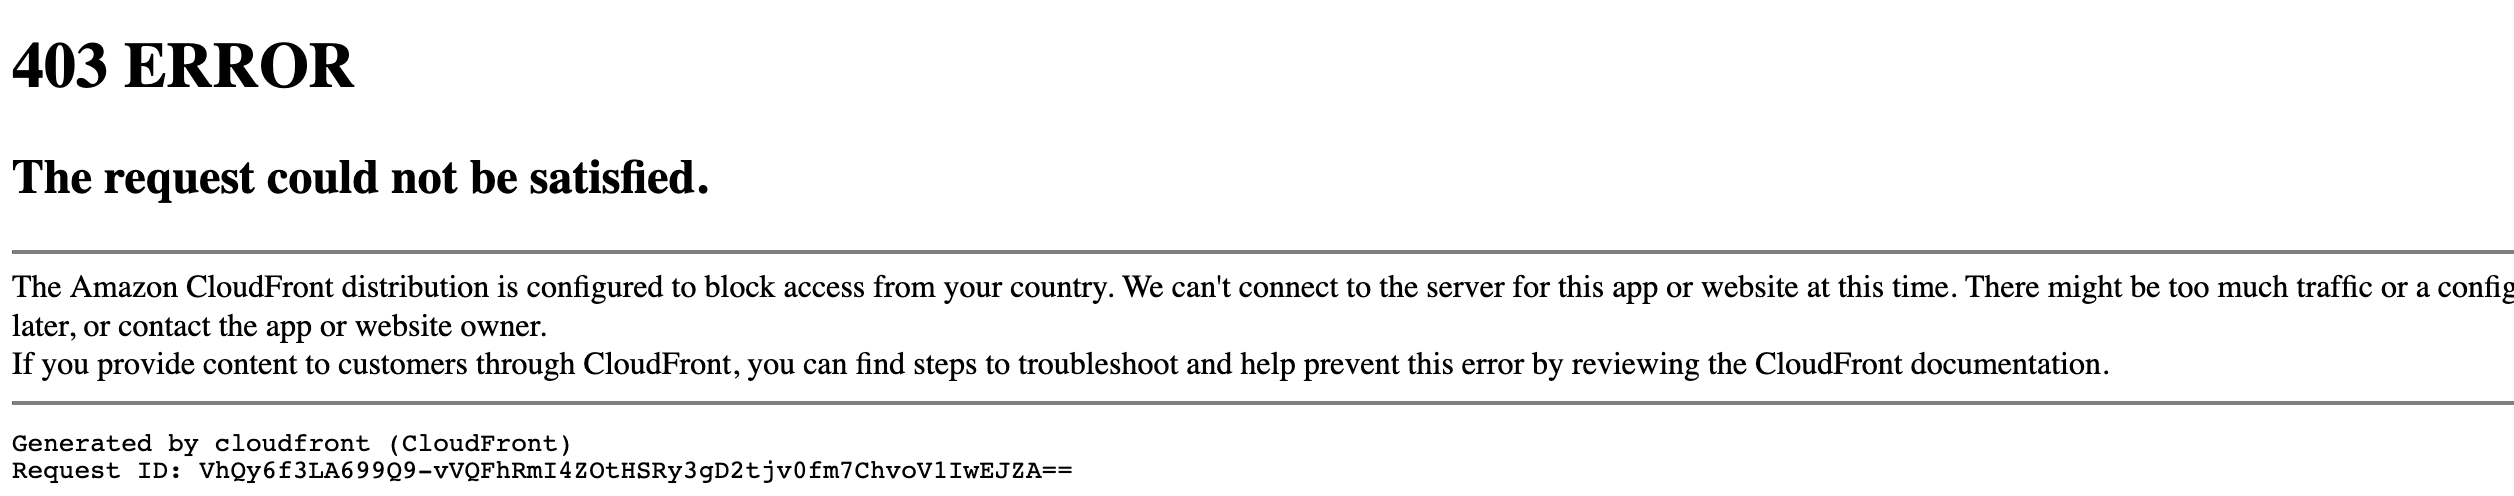 Geoblocking page from Amazon CloudFront<